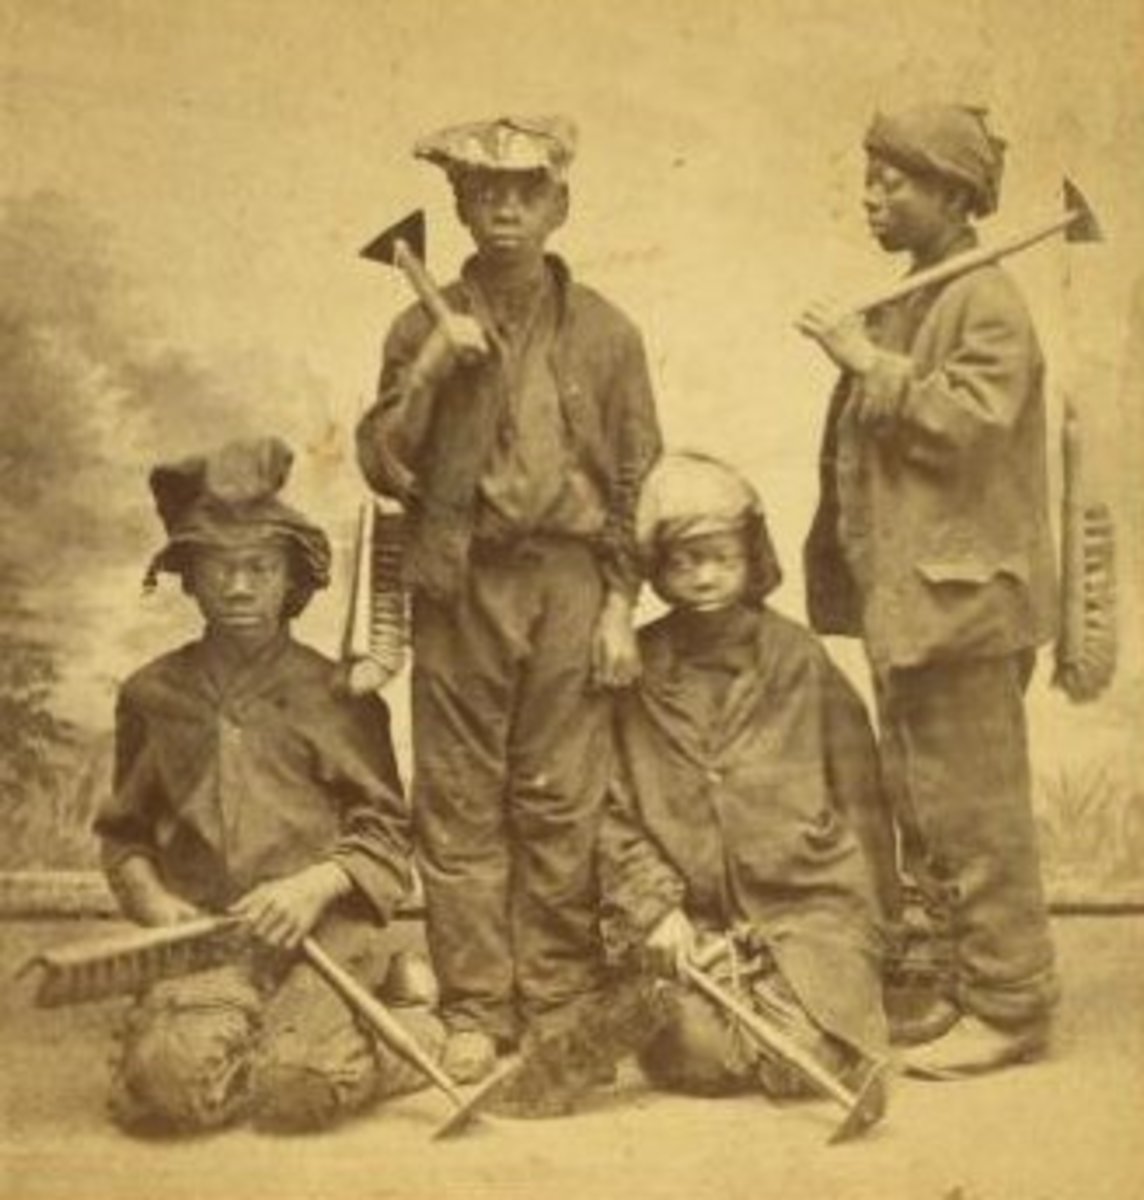 Studio picture of African American child apprentice chimney sweeps by Havens O. Pierre. Taken sometime between 1868 and 1900.